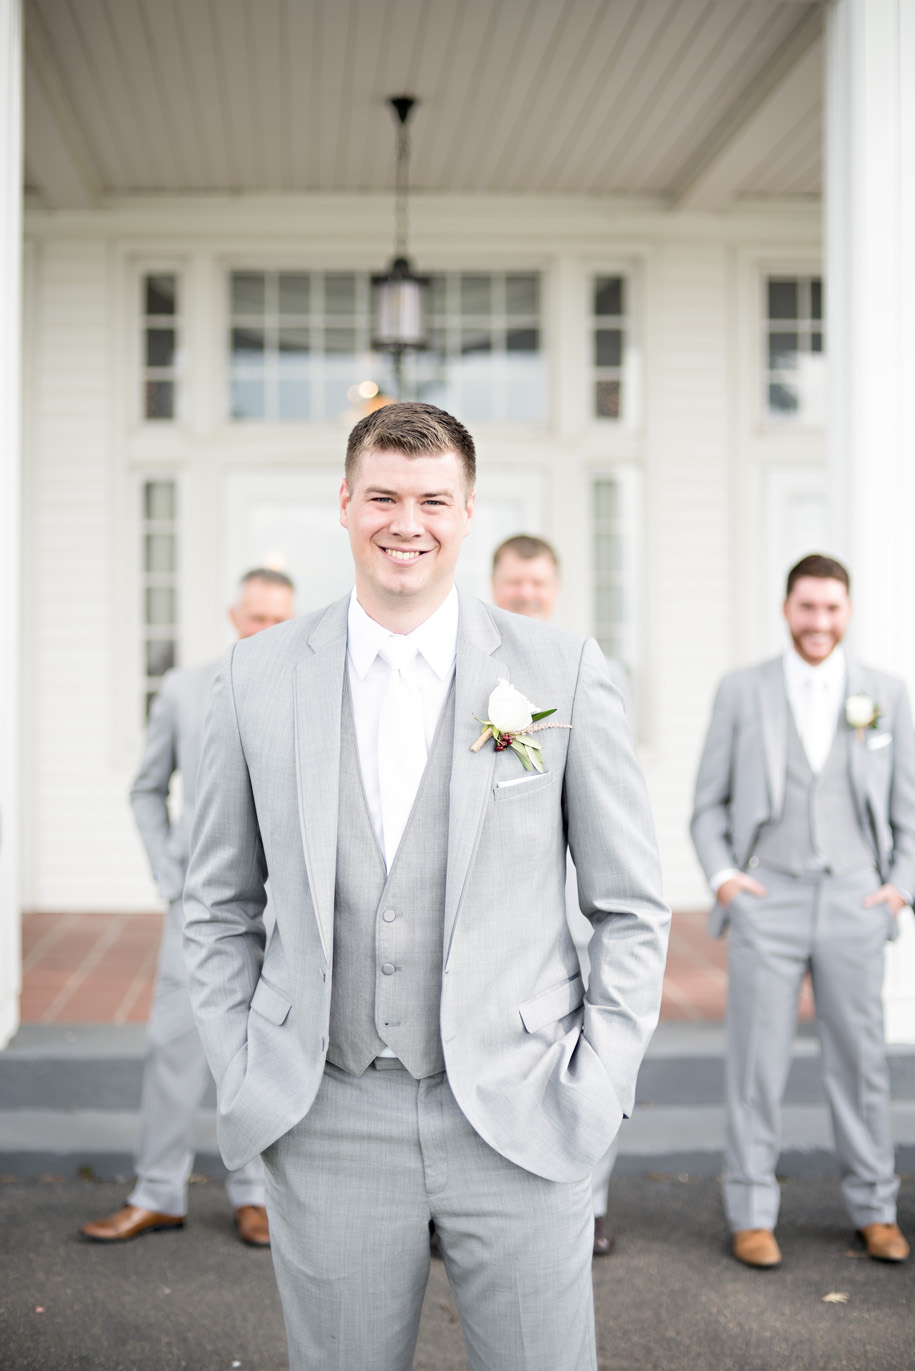 Groom's wedding day attire l gray suit l michael kors watch l Rustic Waldenwoods Hartland, Michigan Summer Wedding l Rose boutonniere with berries l White tie